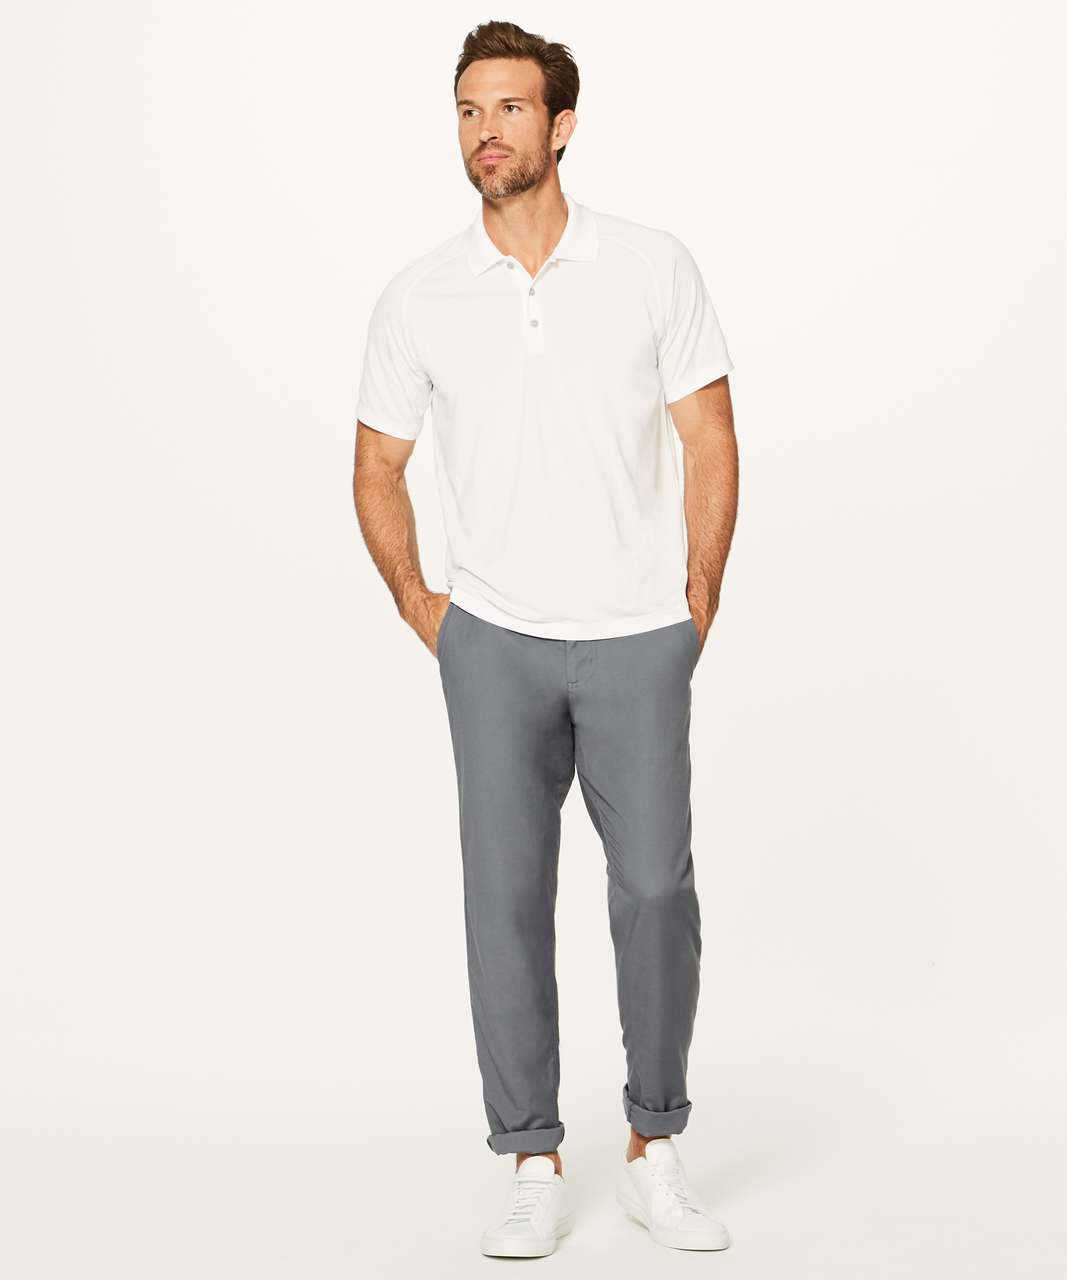 Lululemon Metal Vent Tech Polo - White / White (First Release)